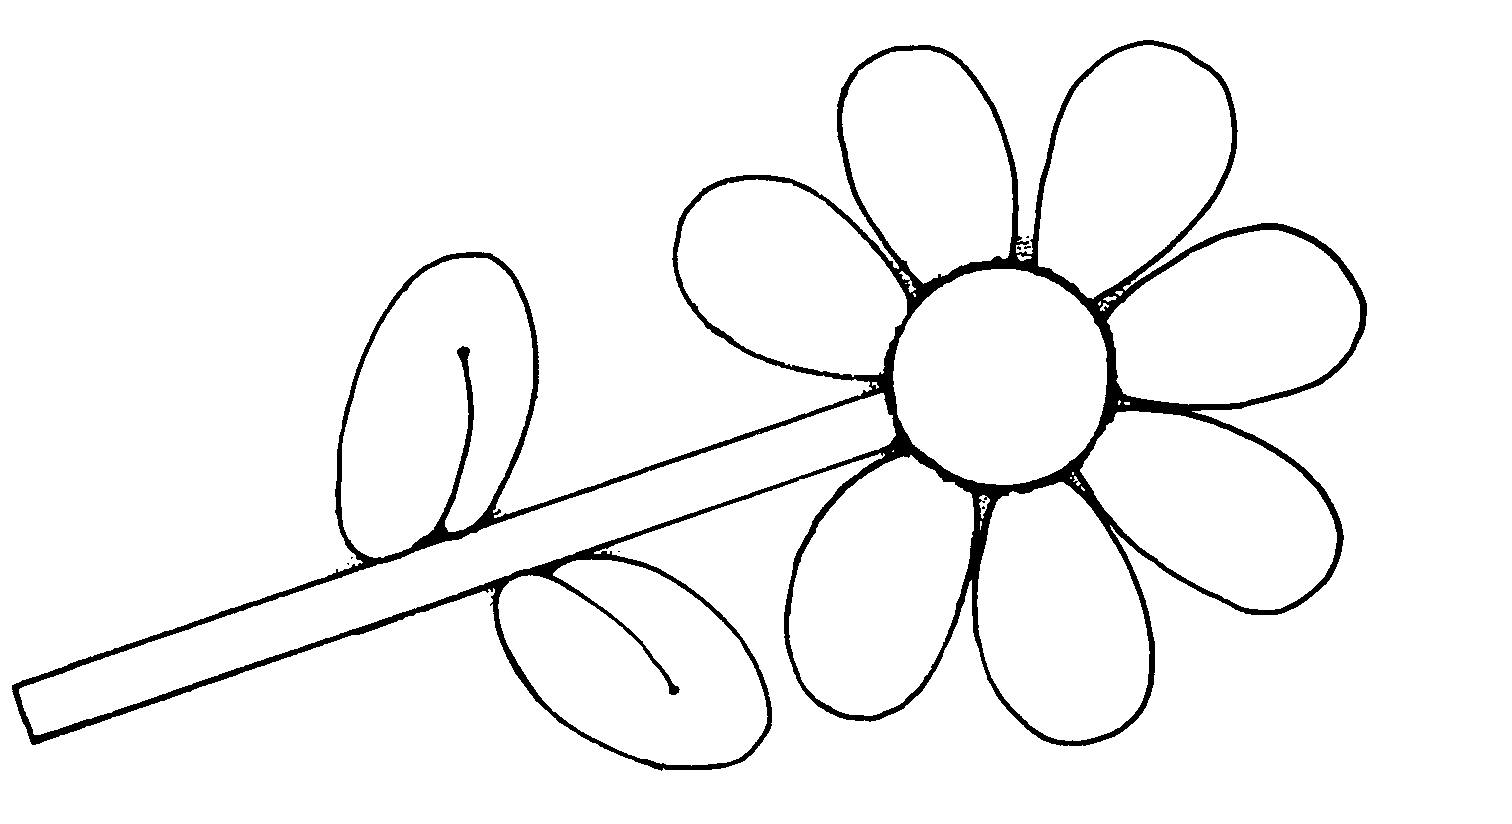 Flower black and white black and white flower border clipart free